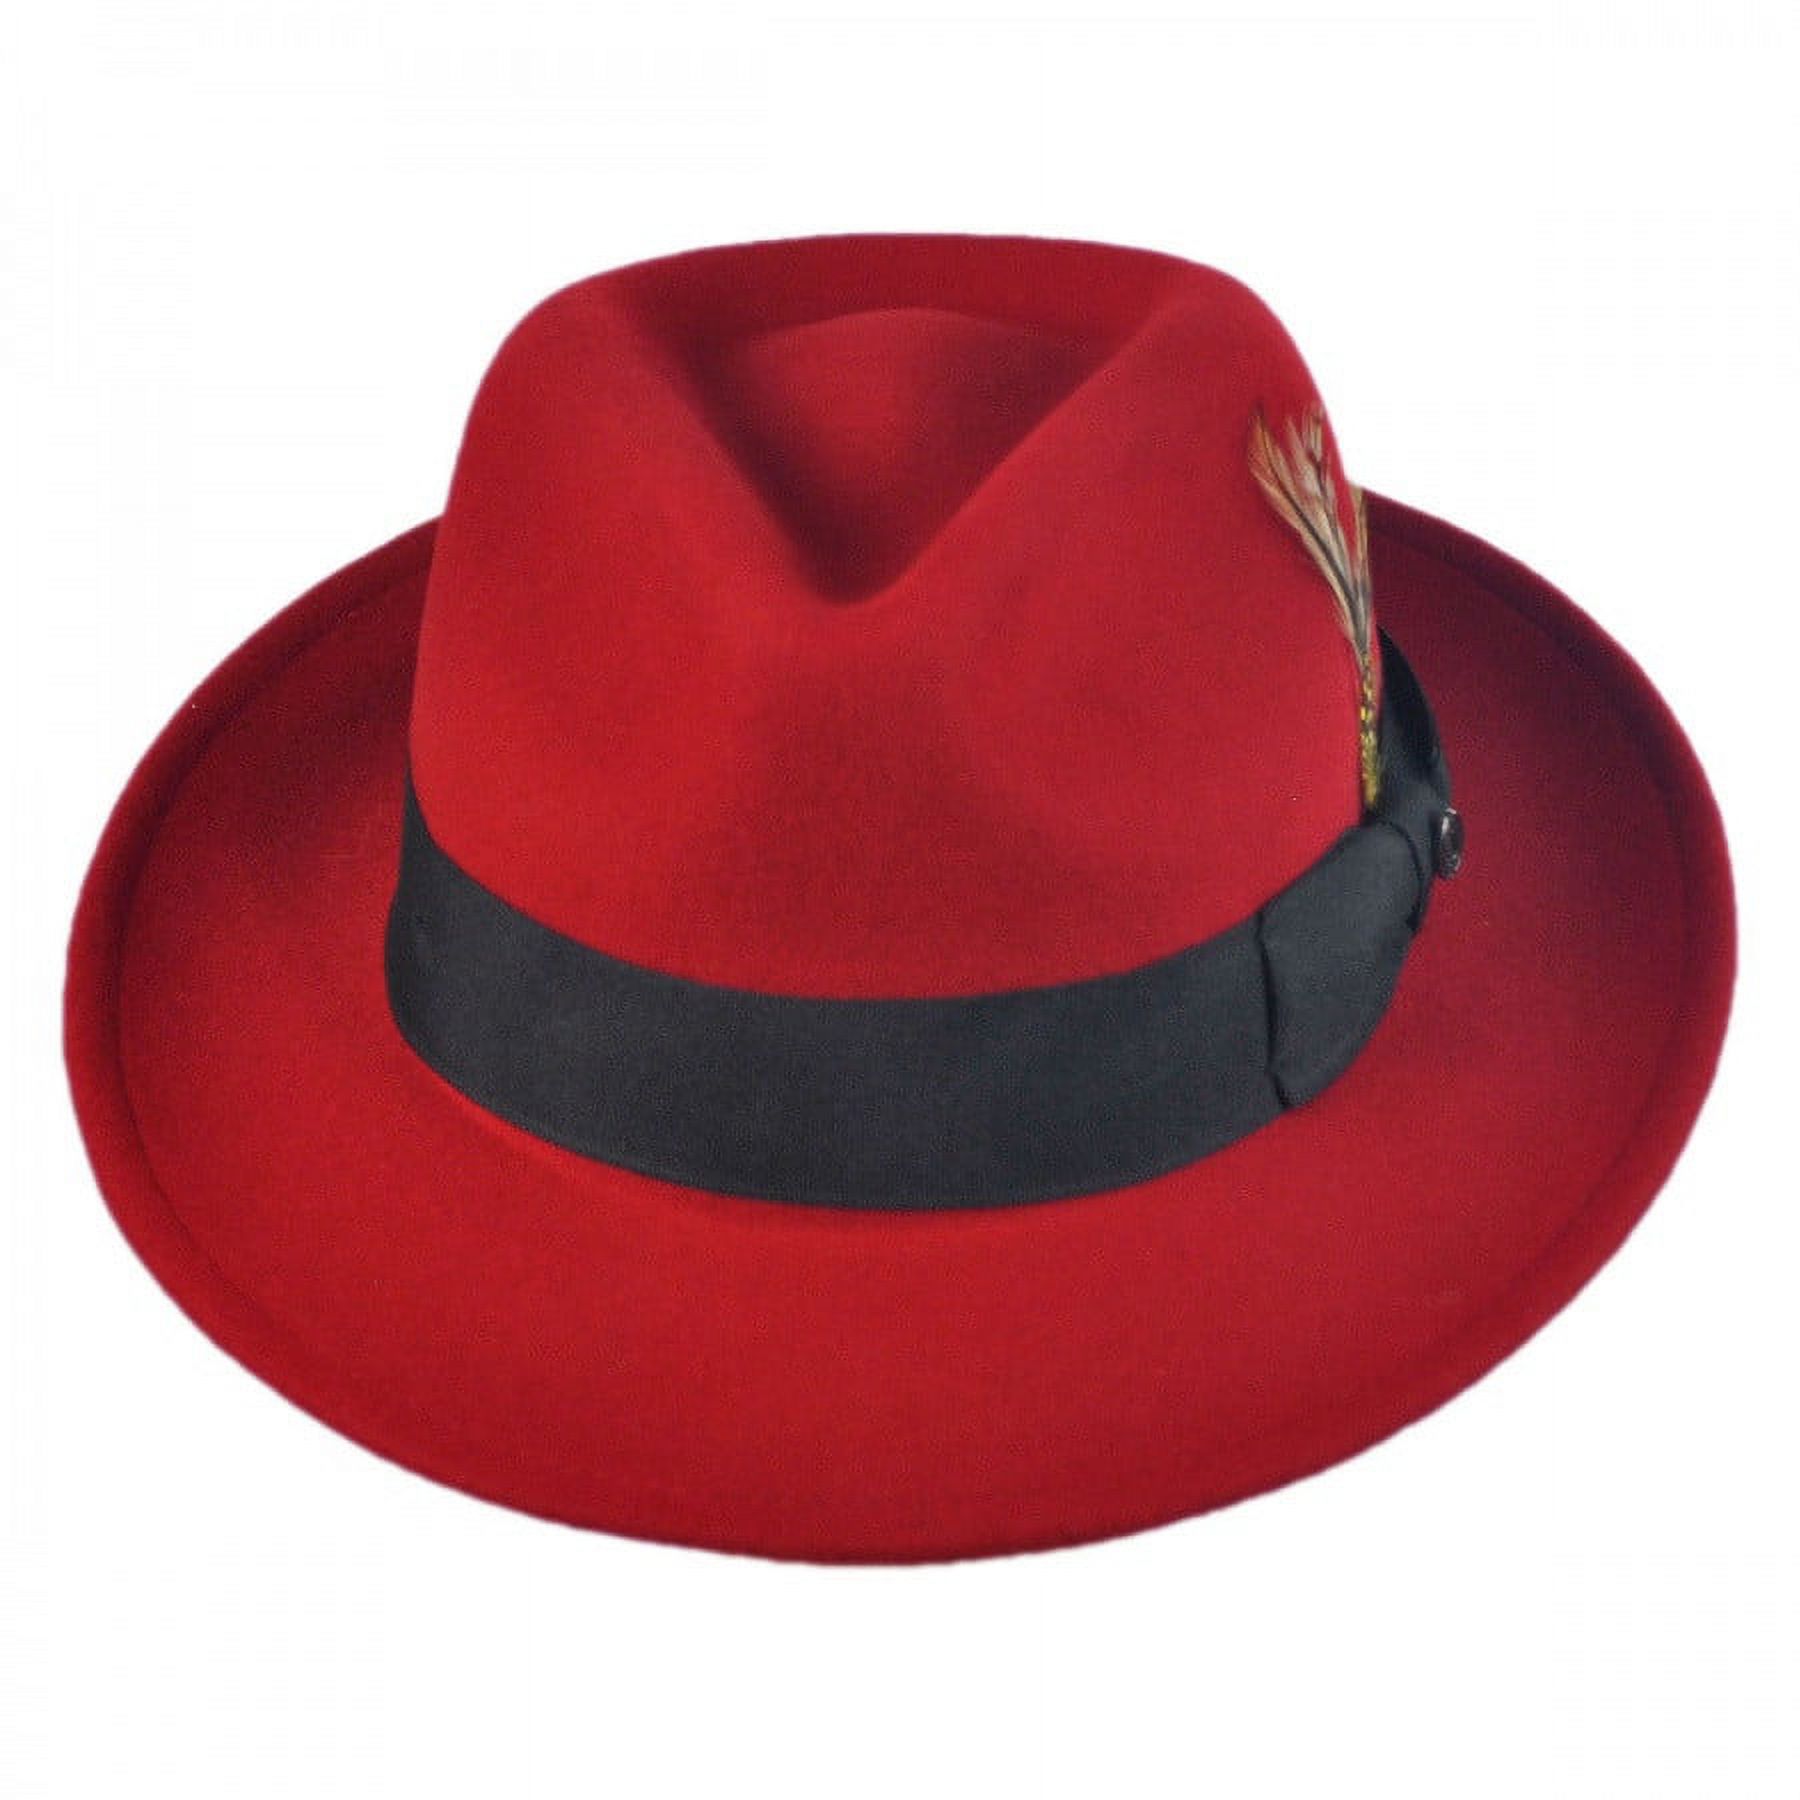 Pachuco Crushable Wool Felt Fedora Hat - L - Red - image 2 of 6